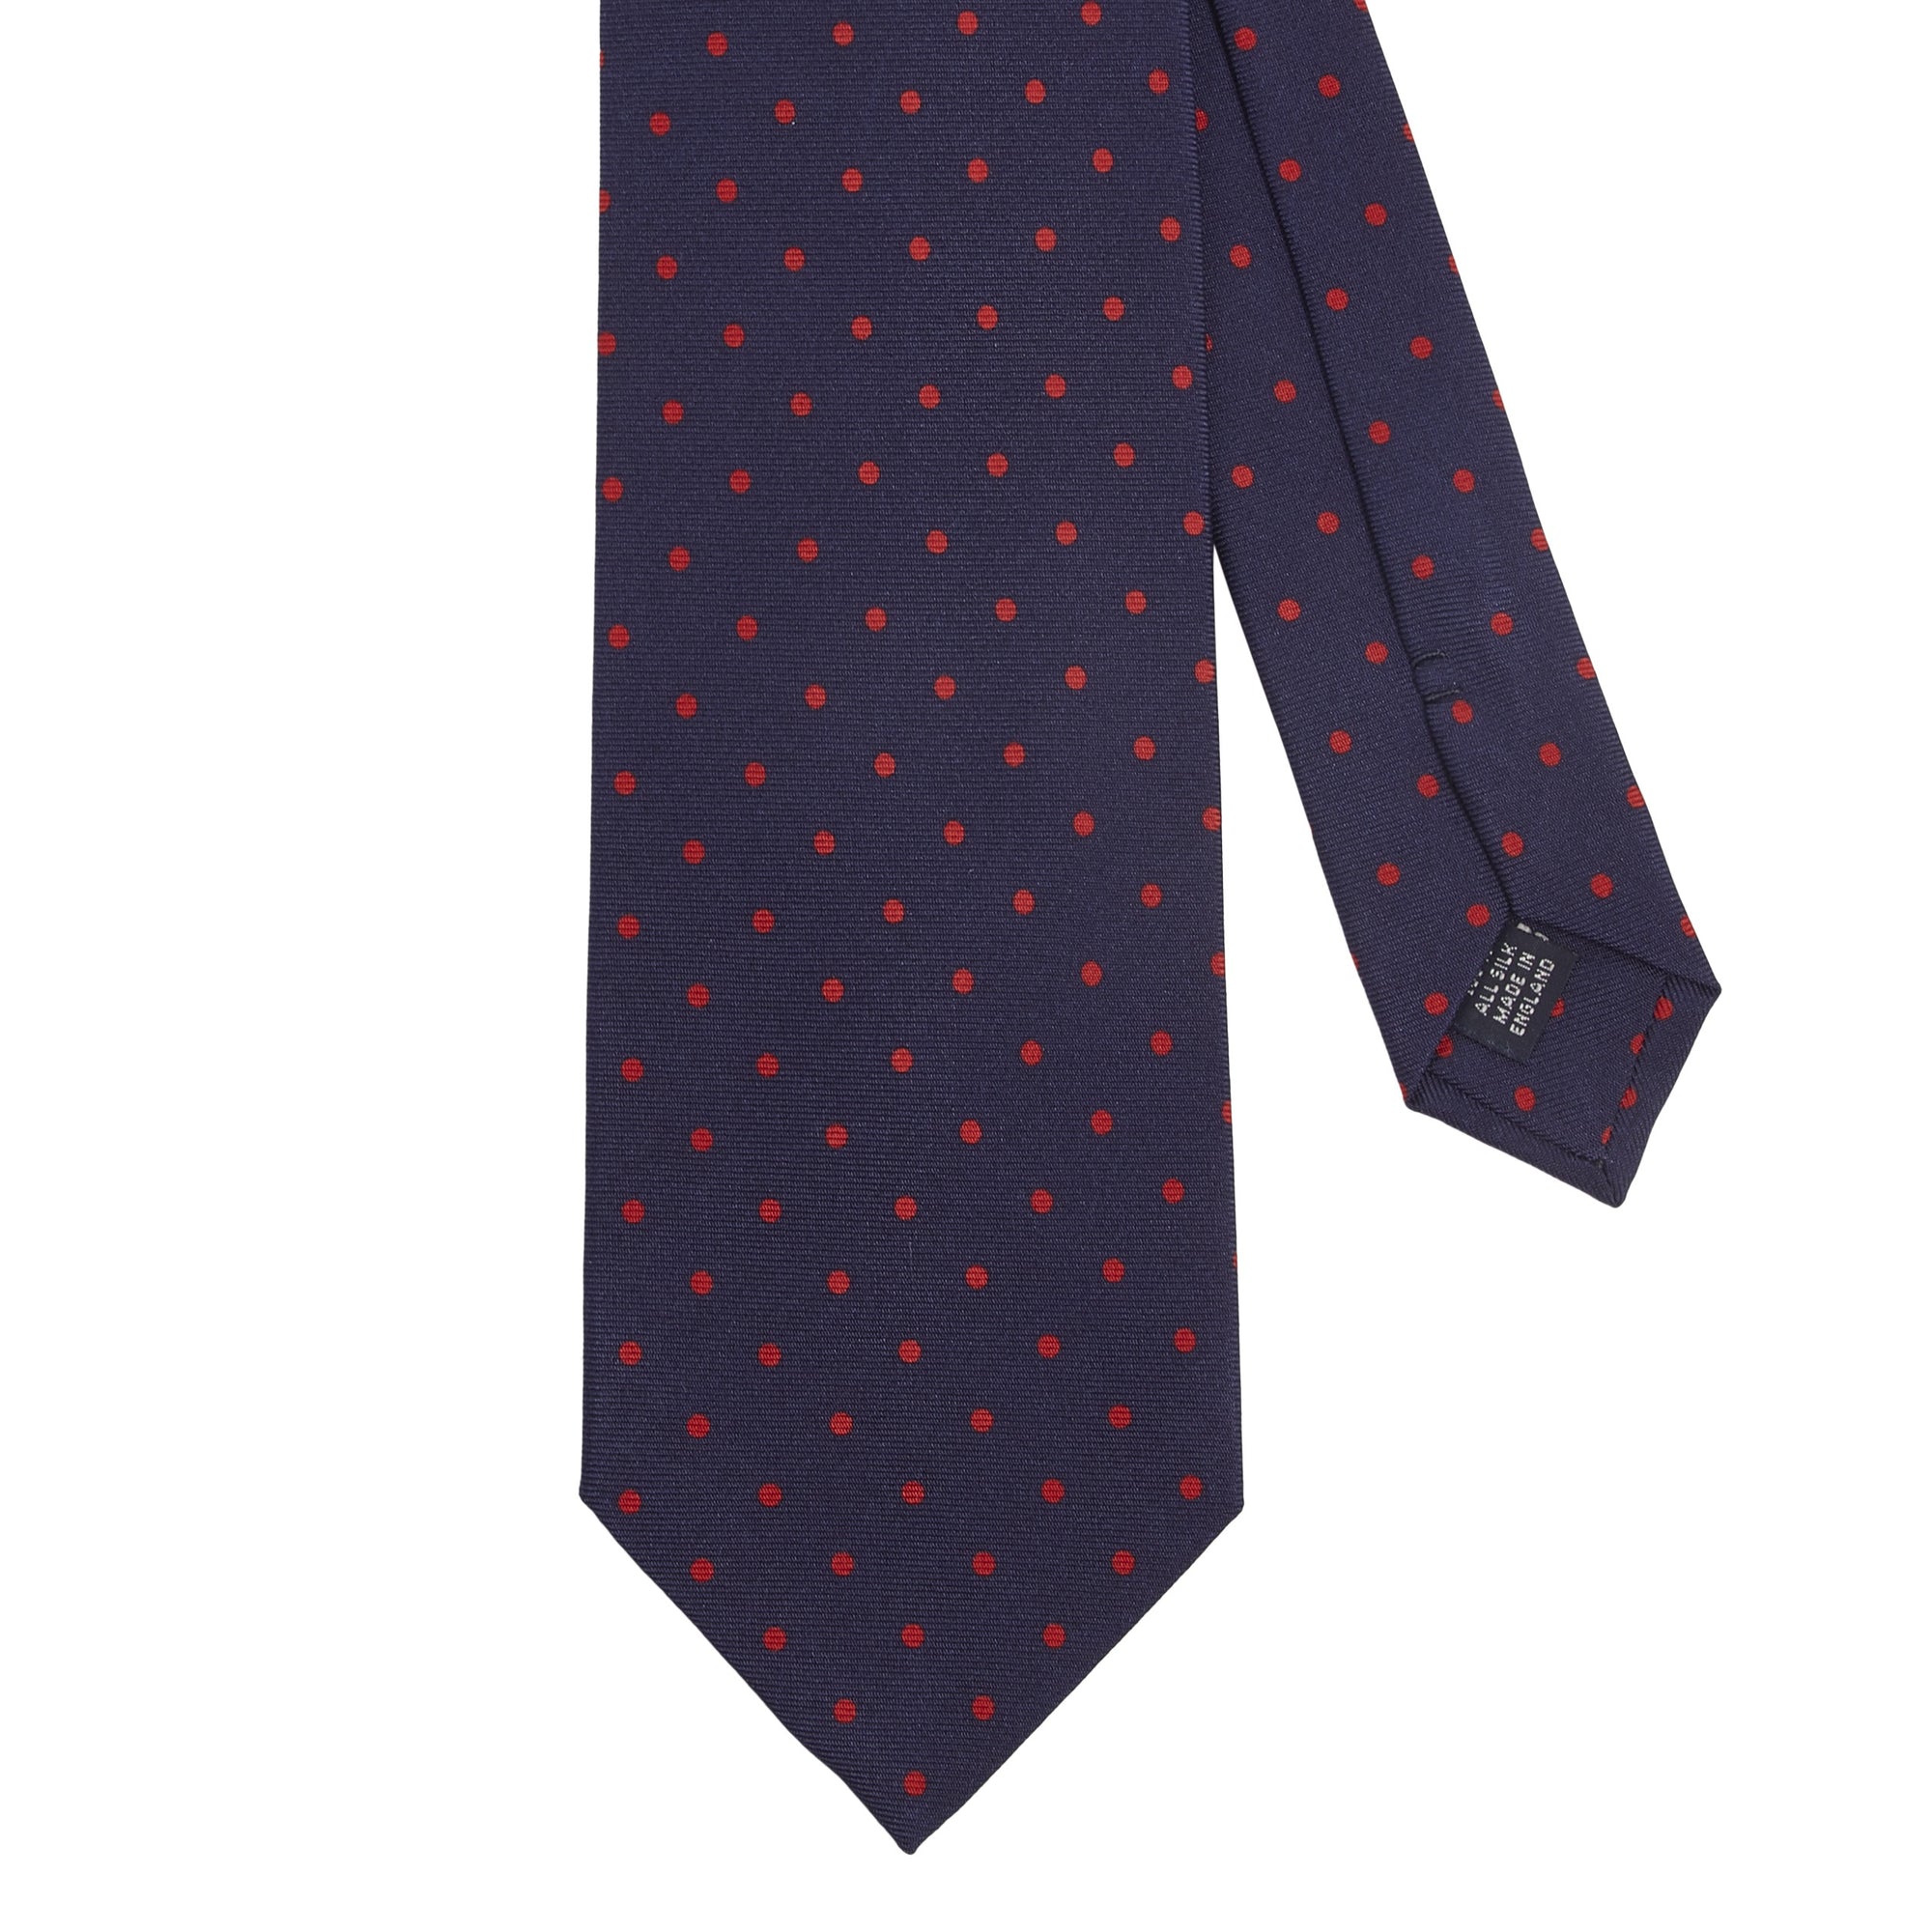 A handmade Sovereign Grade Navy-Red London Dot Printed Silk Tie by KirbyAllison.com with red and blue polka dots.